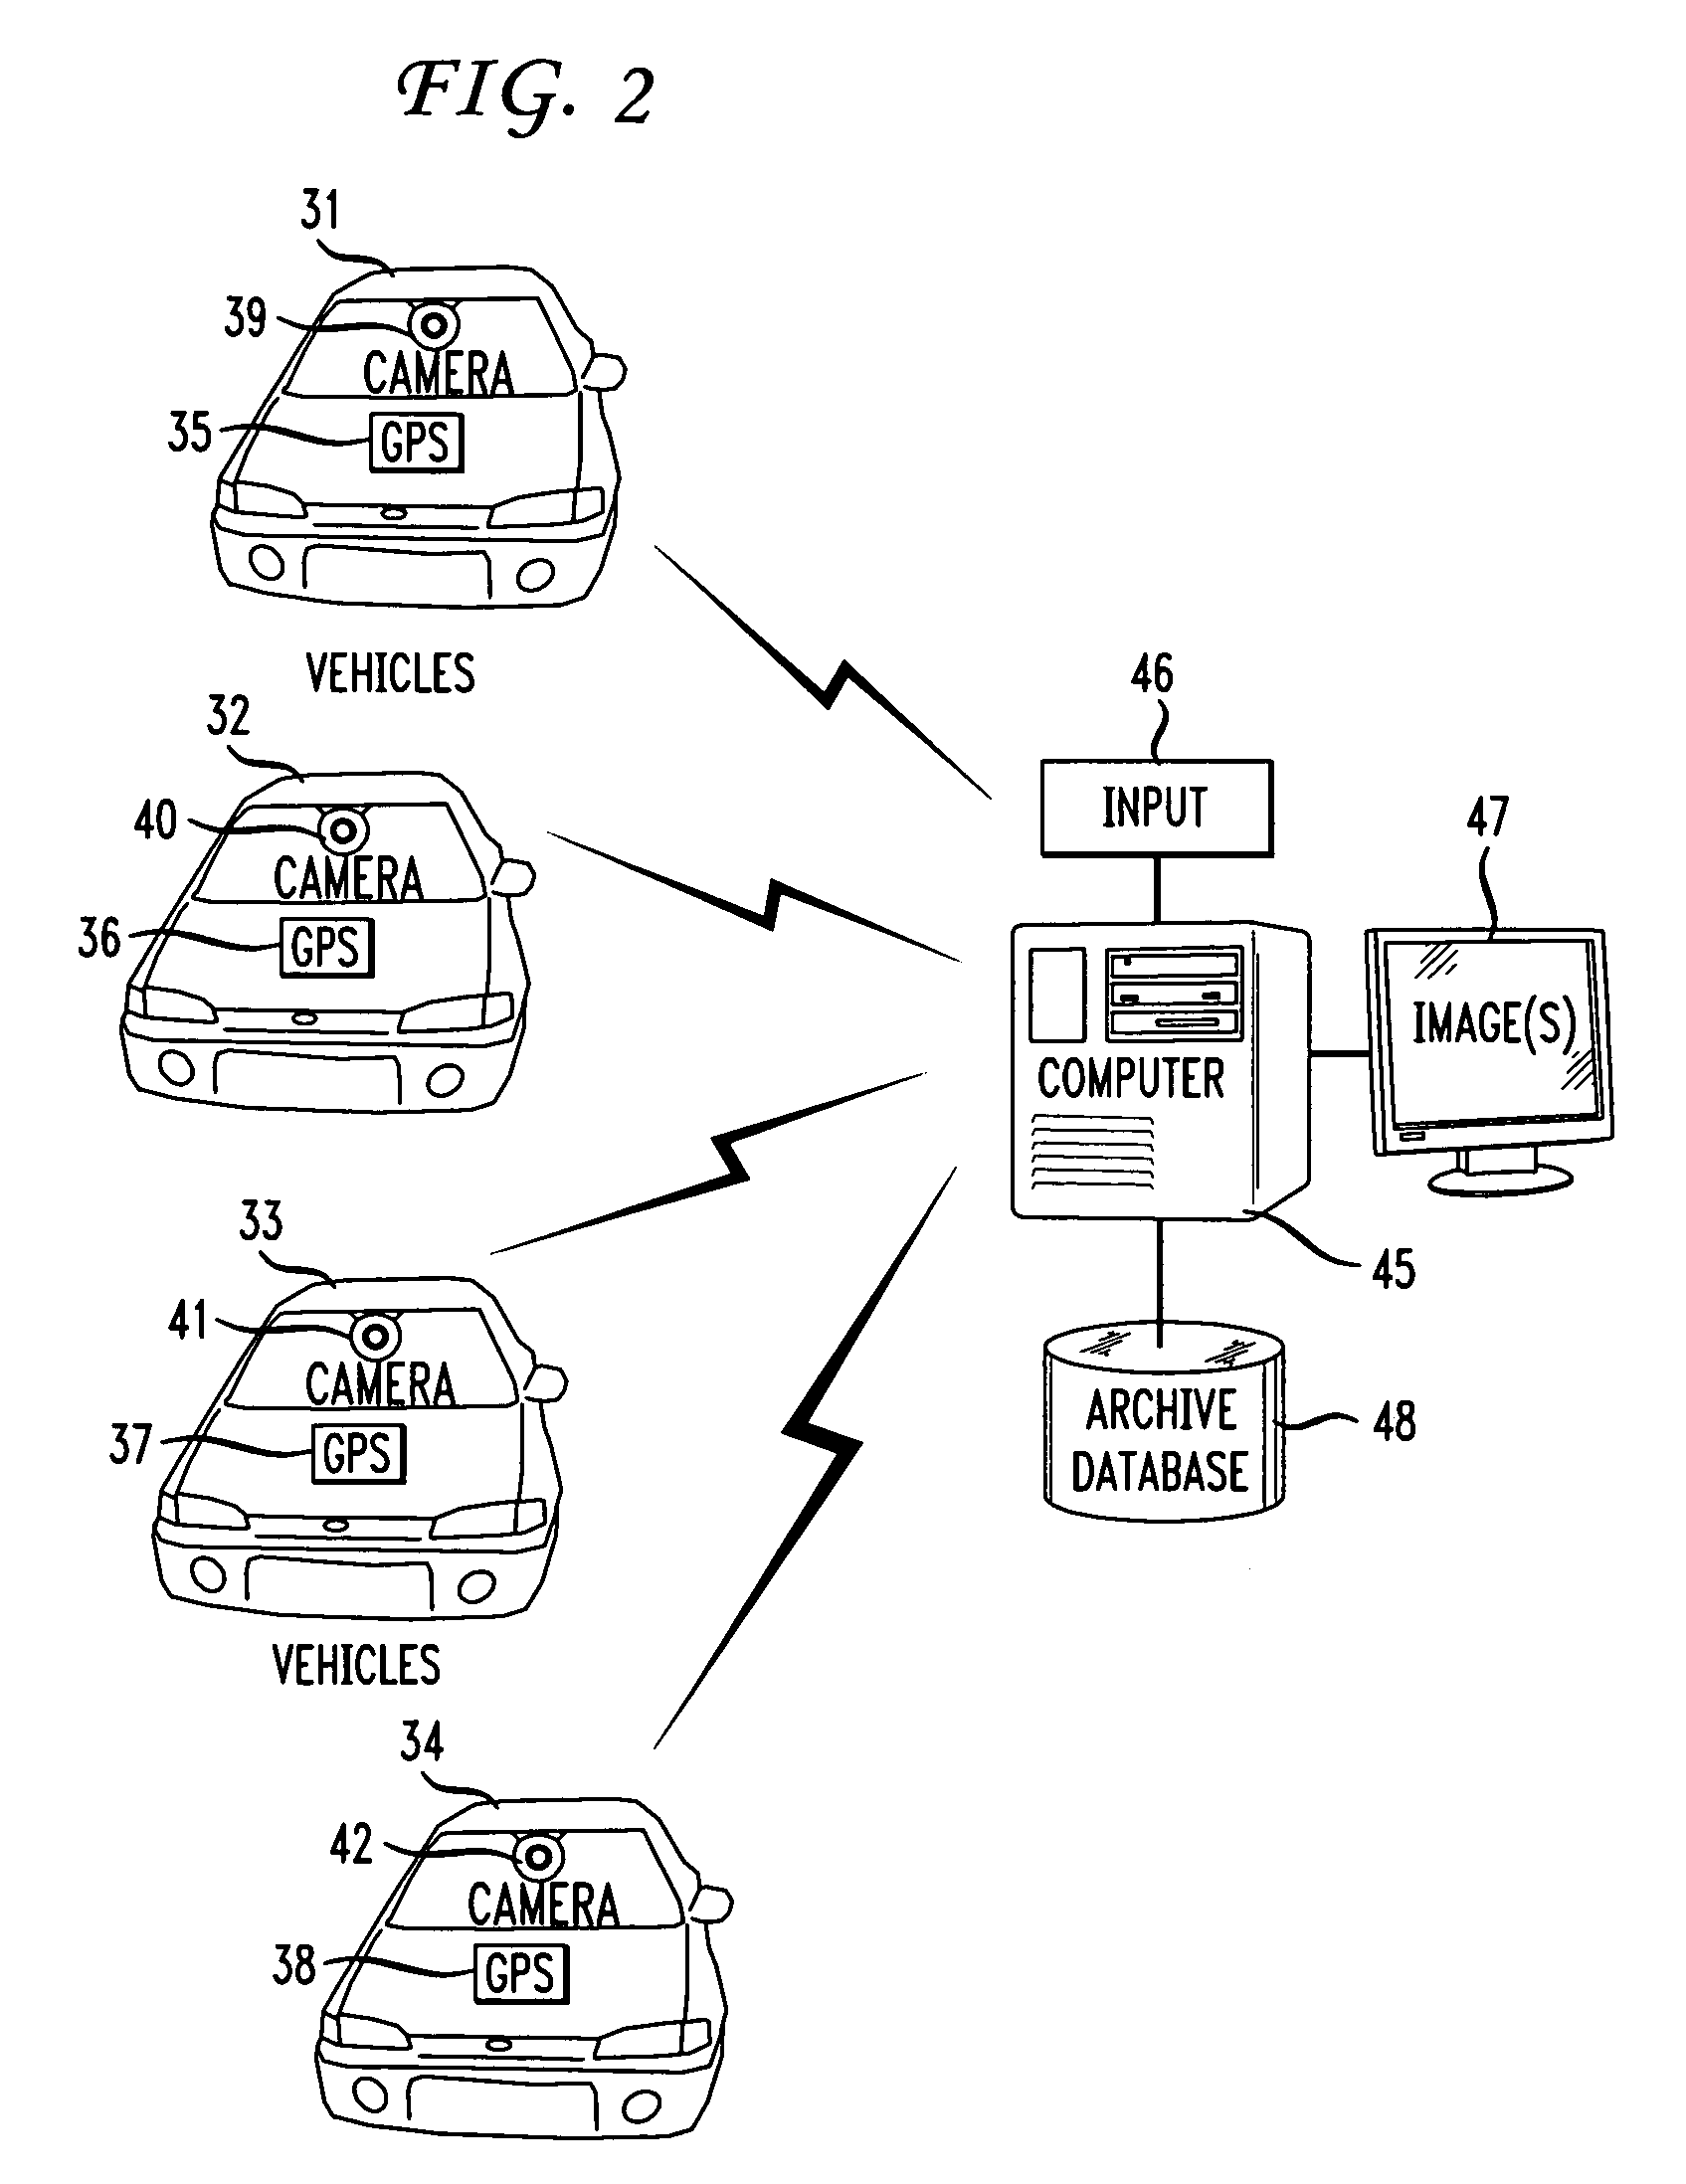 System and method for collecting image data